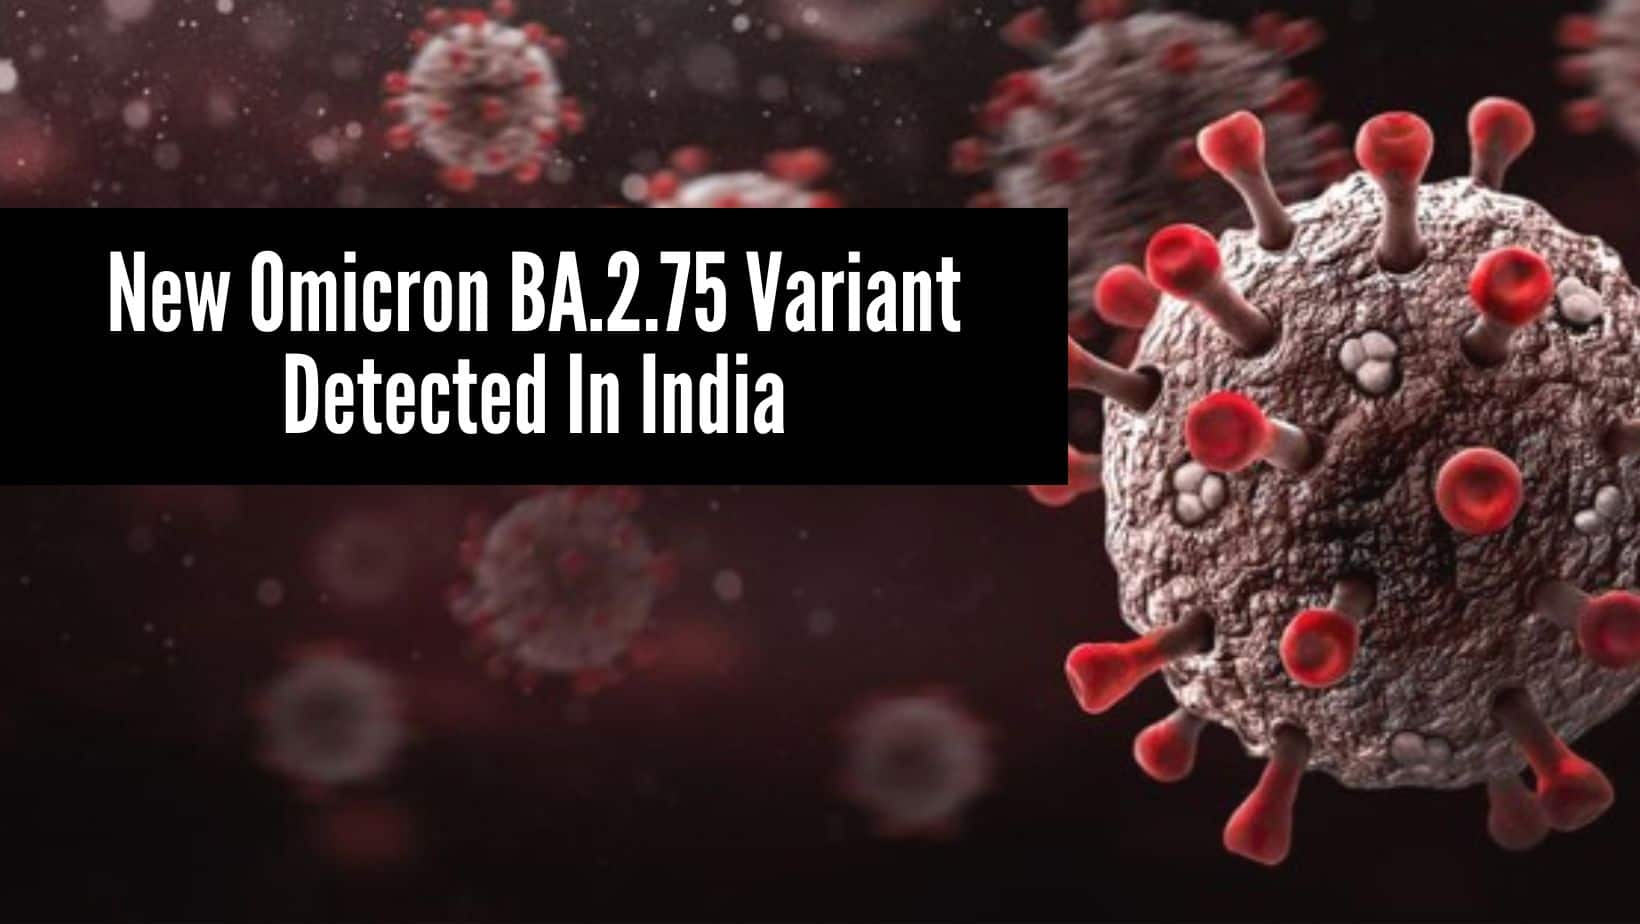 New Omicron BA.2.75 Variant Detected In India Spreading 18% Faster: Know How Different It Is And If It Is Concerning